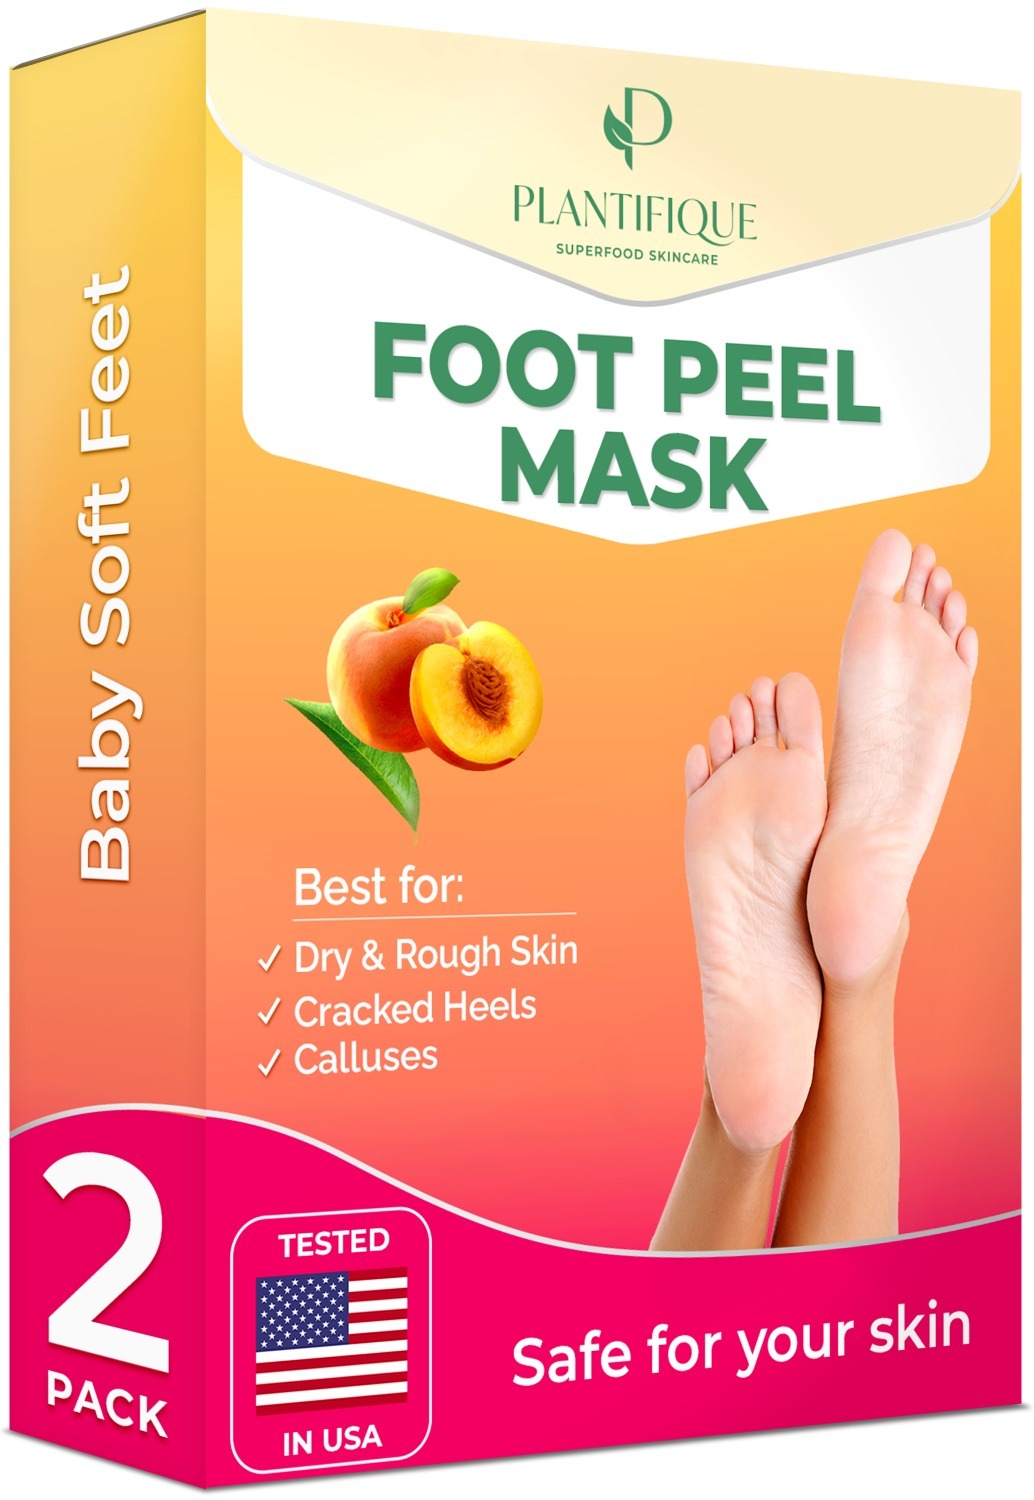 2-Pairs Plantifique Exfoliating Foot Peel Mask (Peach) $9.97 w/ Subscribe & Save + Free Shipping w/ Prime or Orders $25+